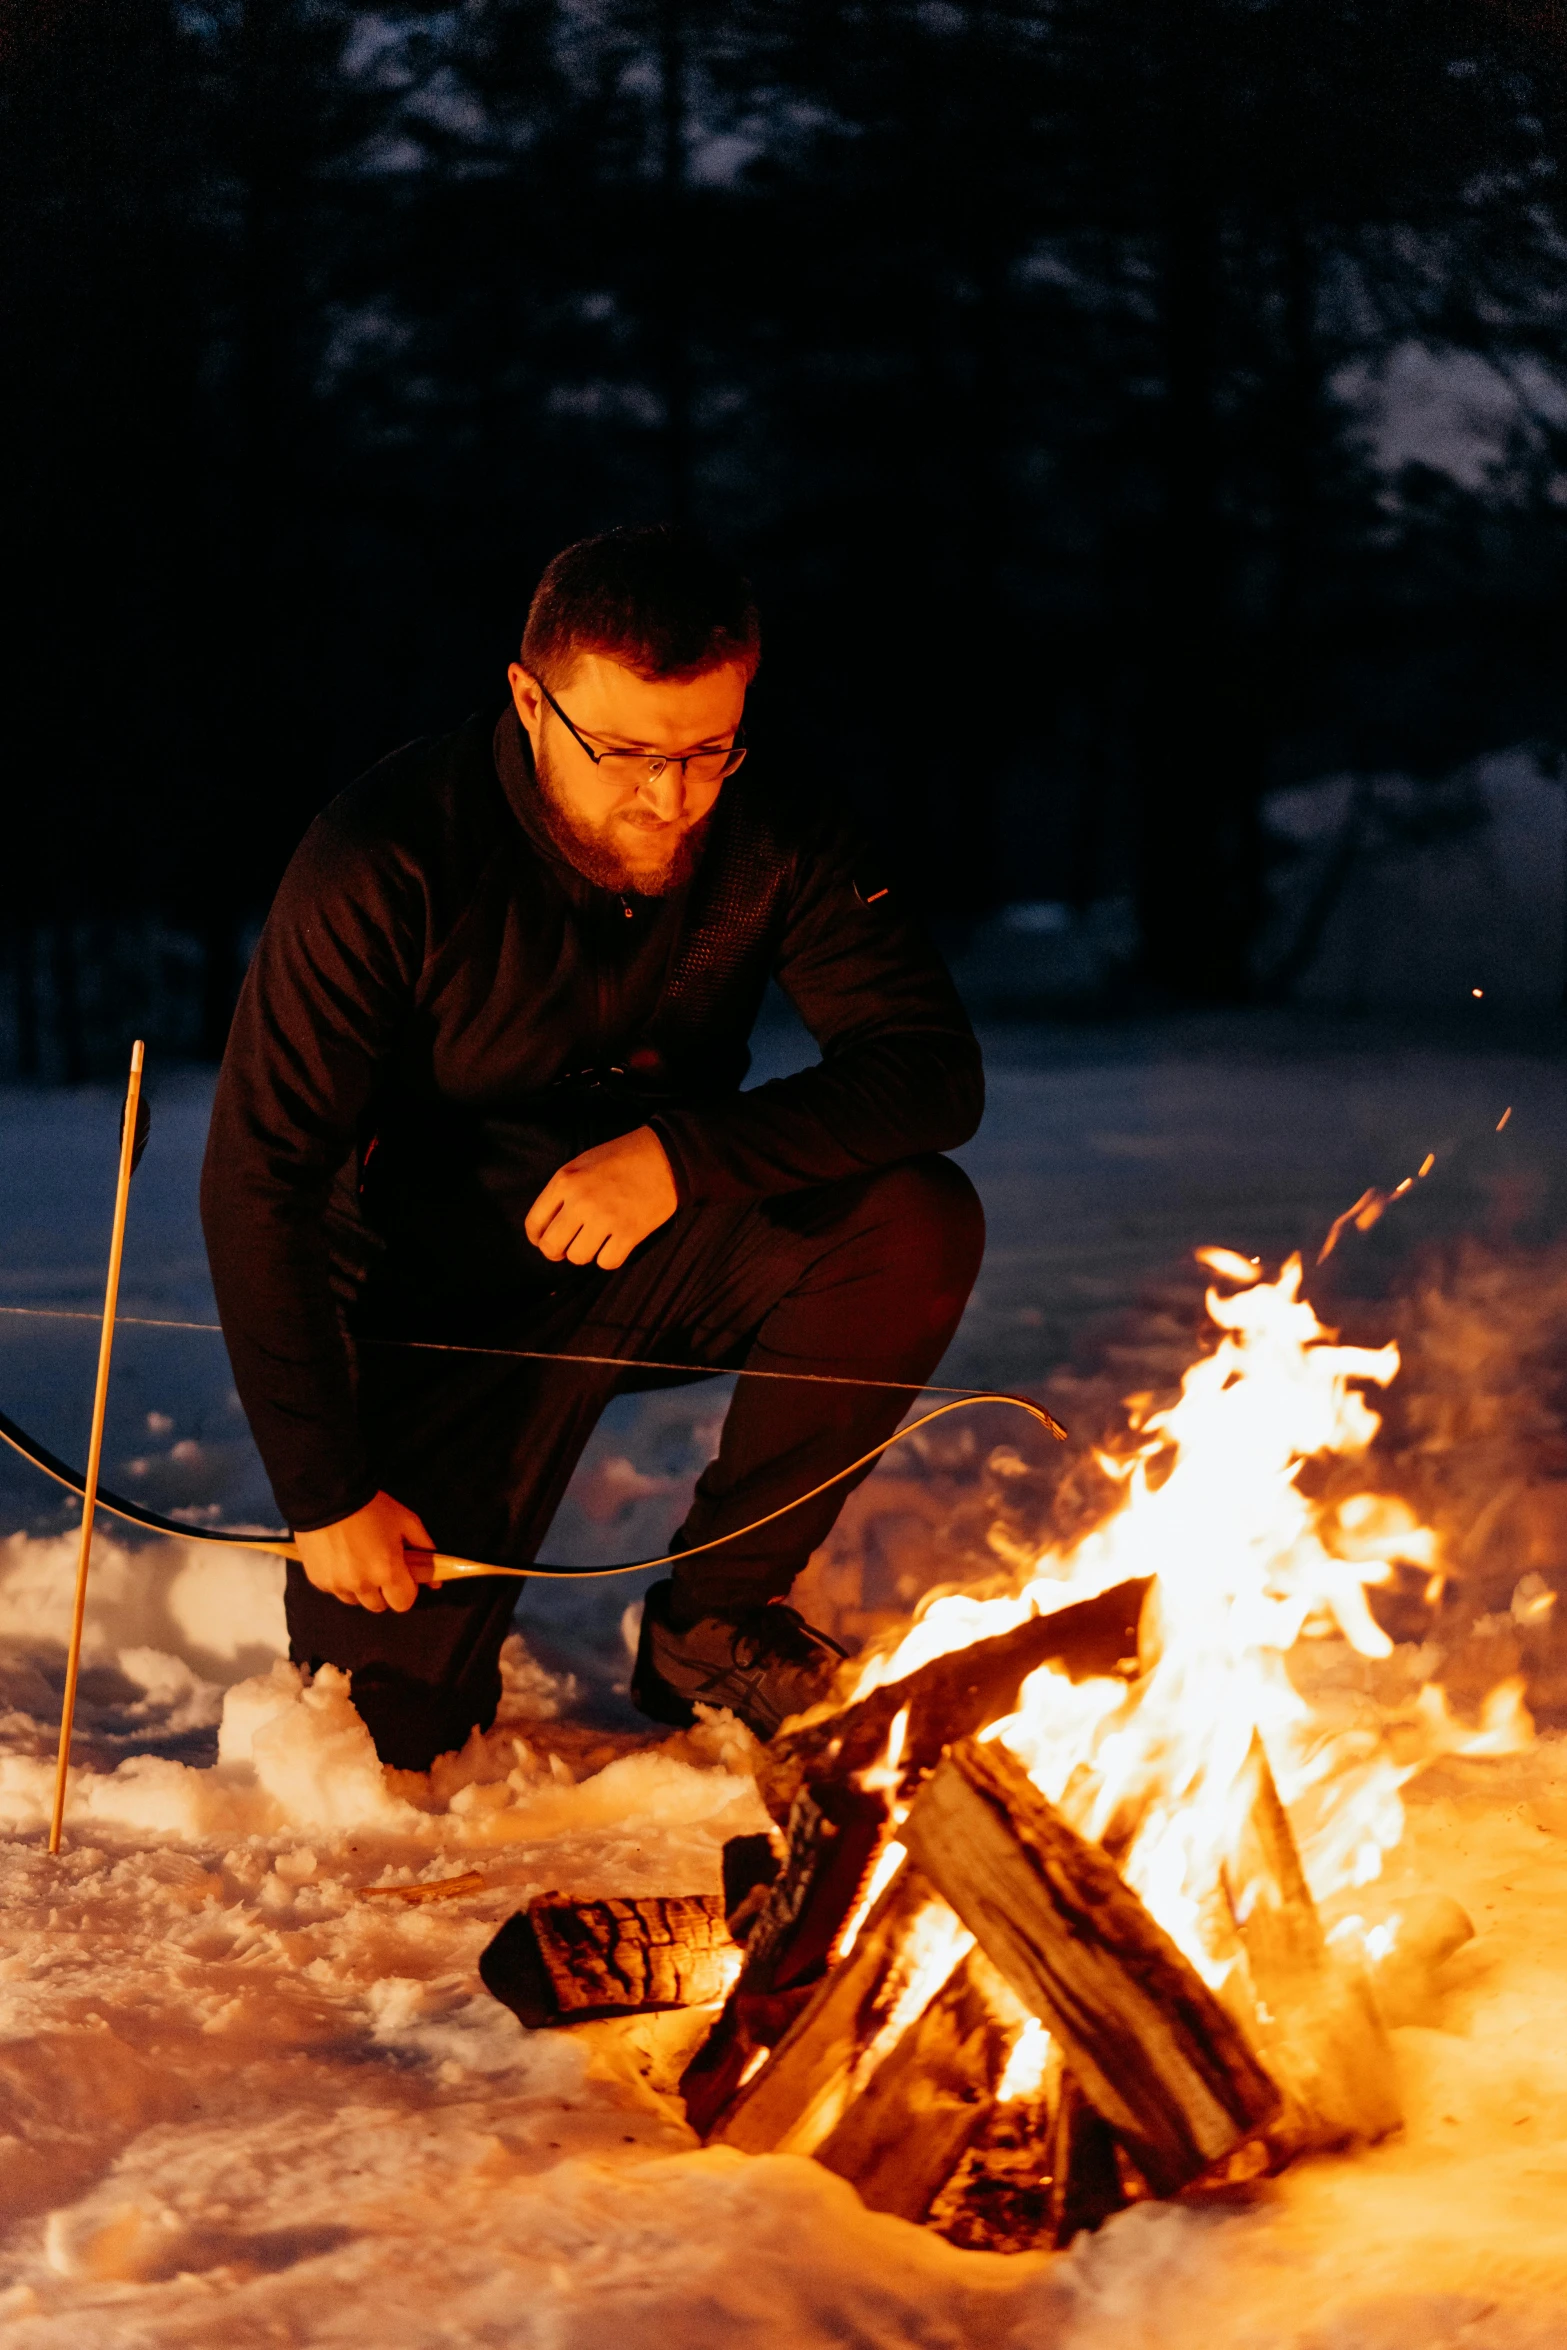 a man roasting marshmallows over a campfire, inspired by Einar Hakonarson, land art, winter vibes, profile image, multiple stories, commercial photo